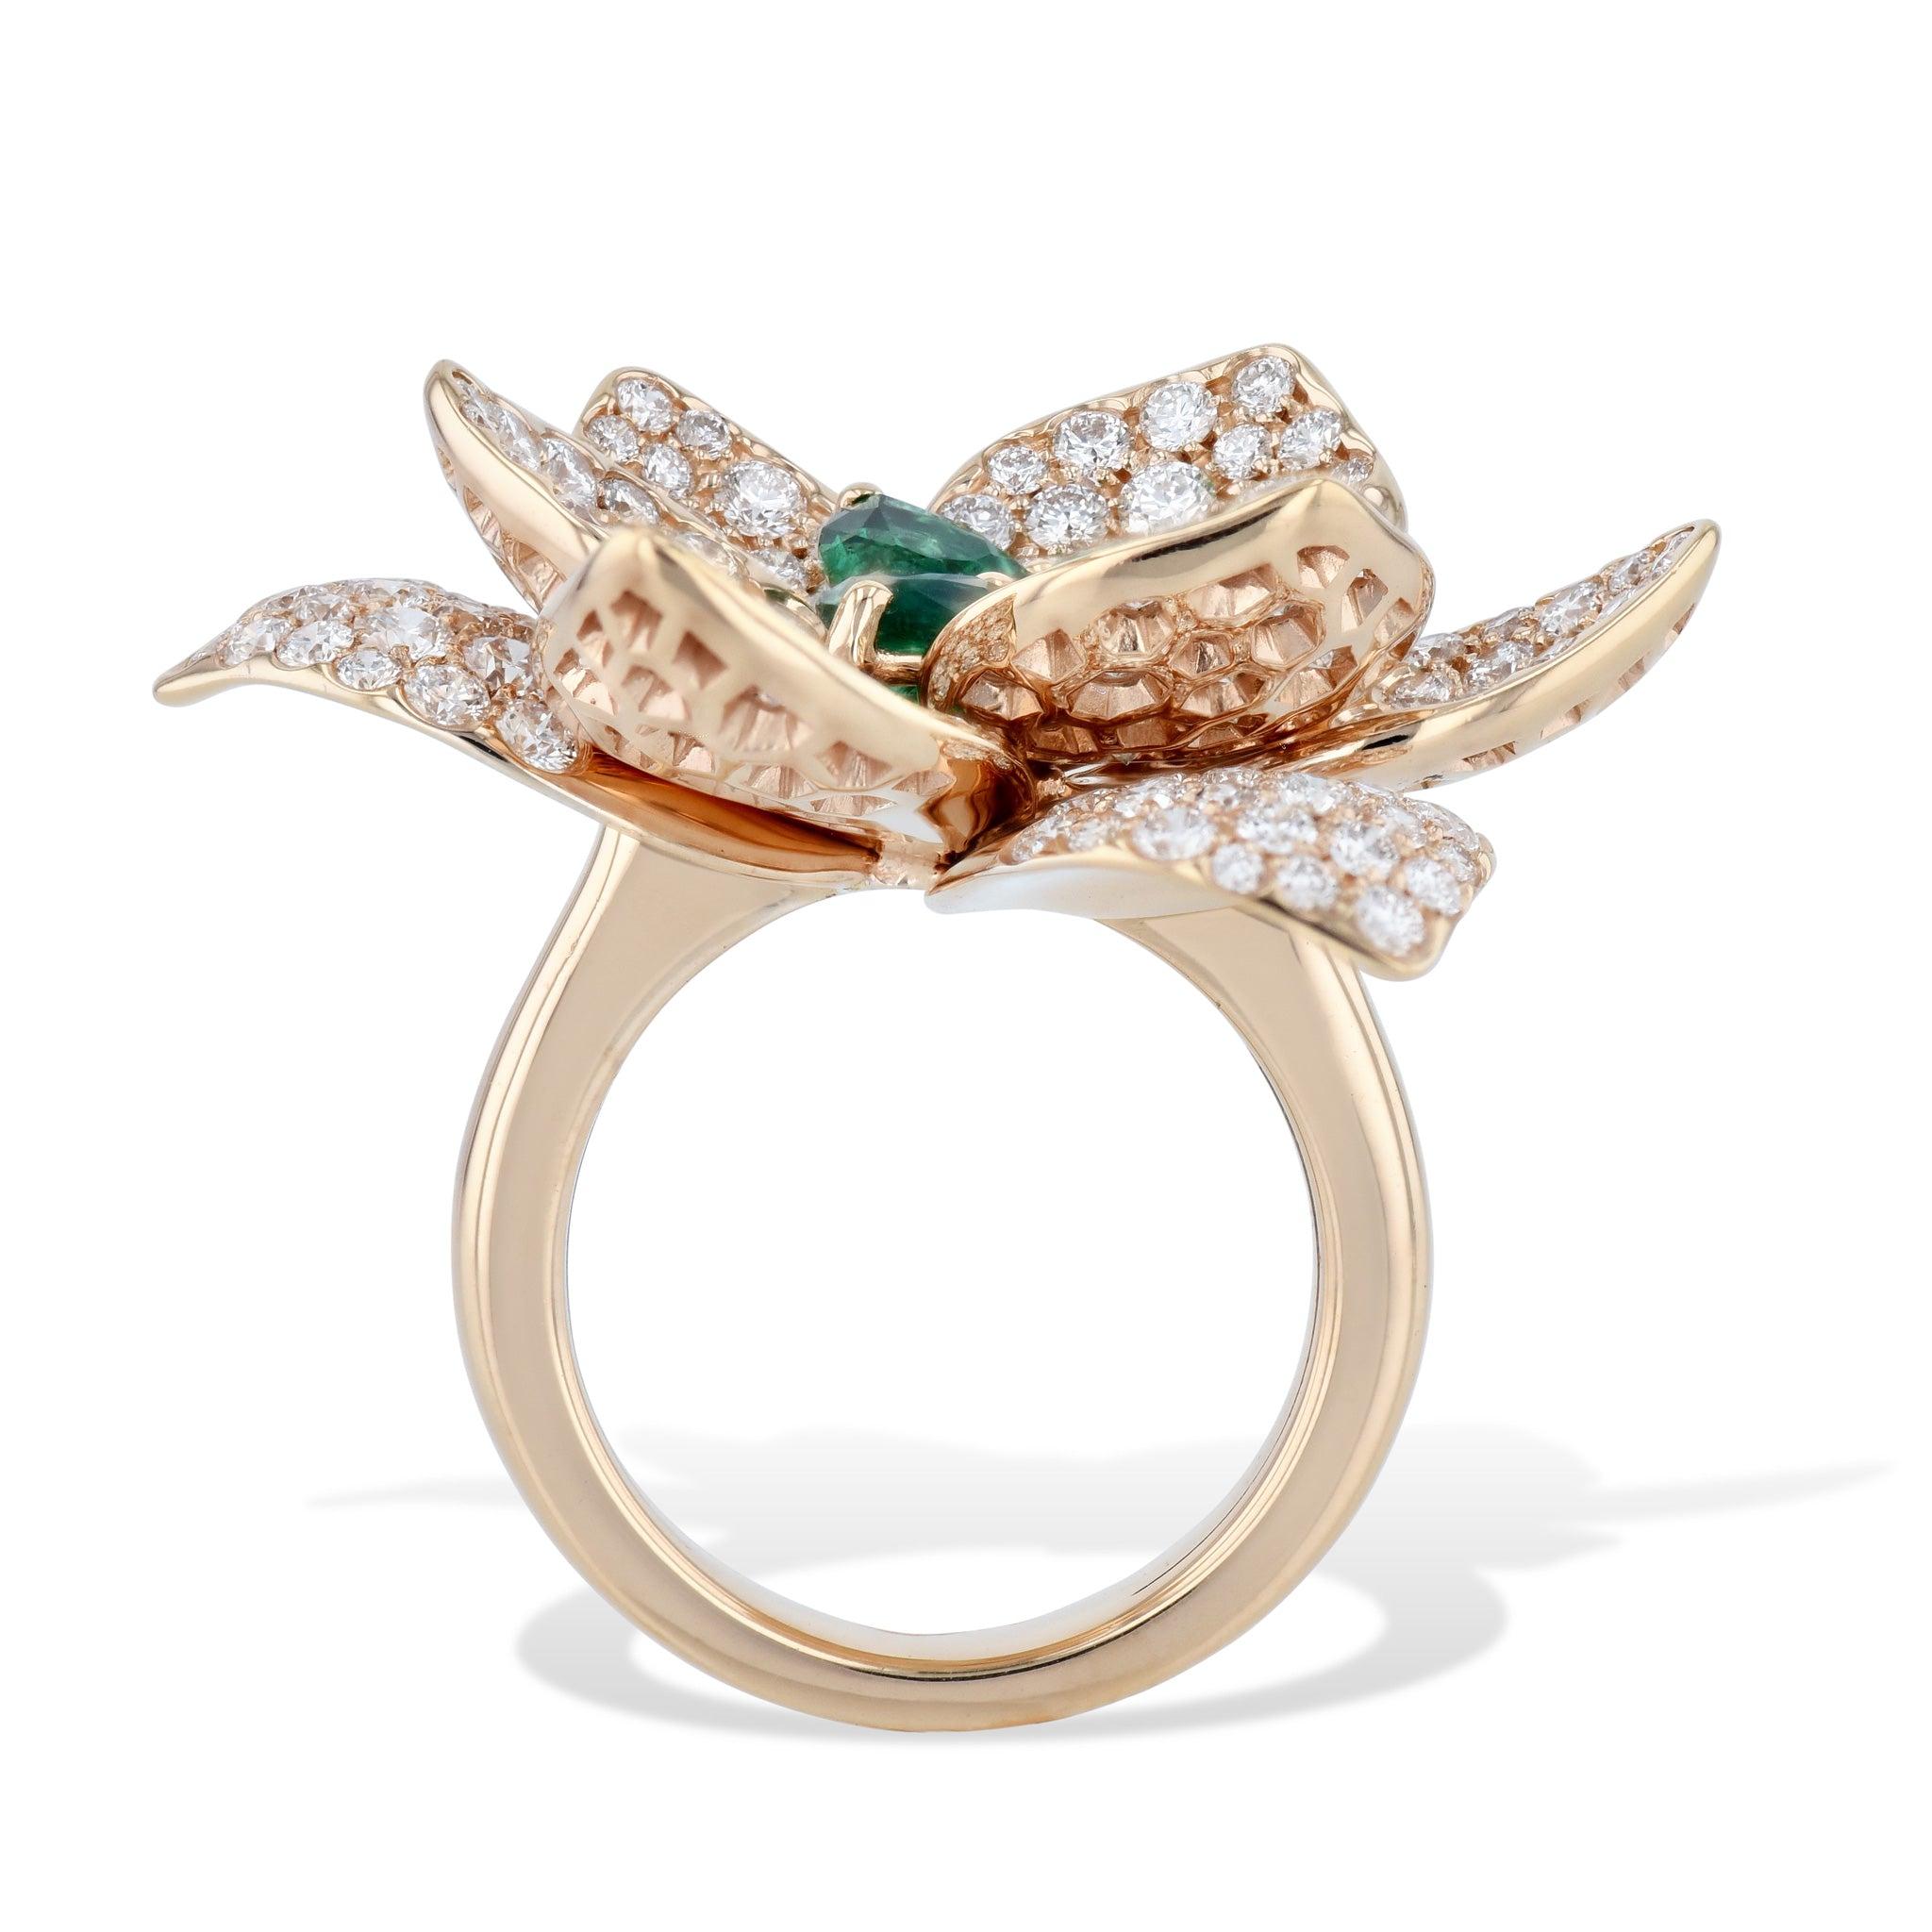 
This beautiful rose gold diamond and emerald flower ring is sure to dazzle!
The center holds a breathtaking pear-shaped emeralds totaling 1.78 carats, pear shaped. 
These are surrounded by diamond pave pedals. 
Rose Gold Diamond and Emerald Flower